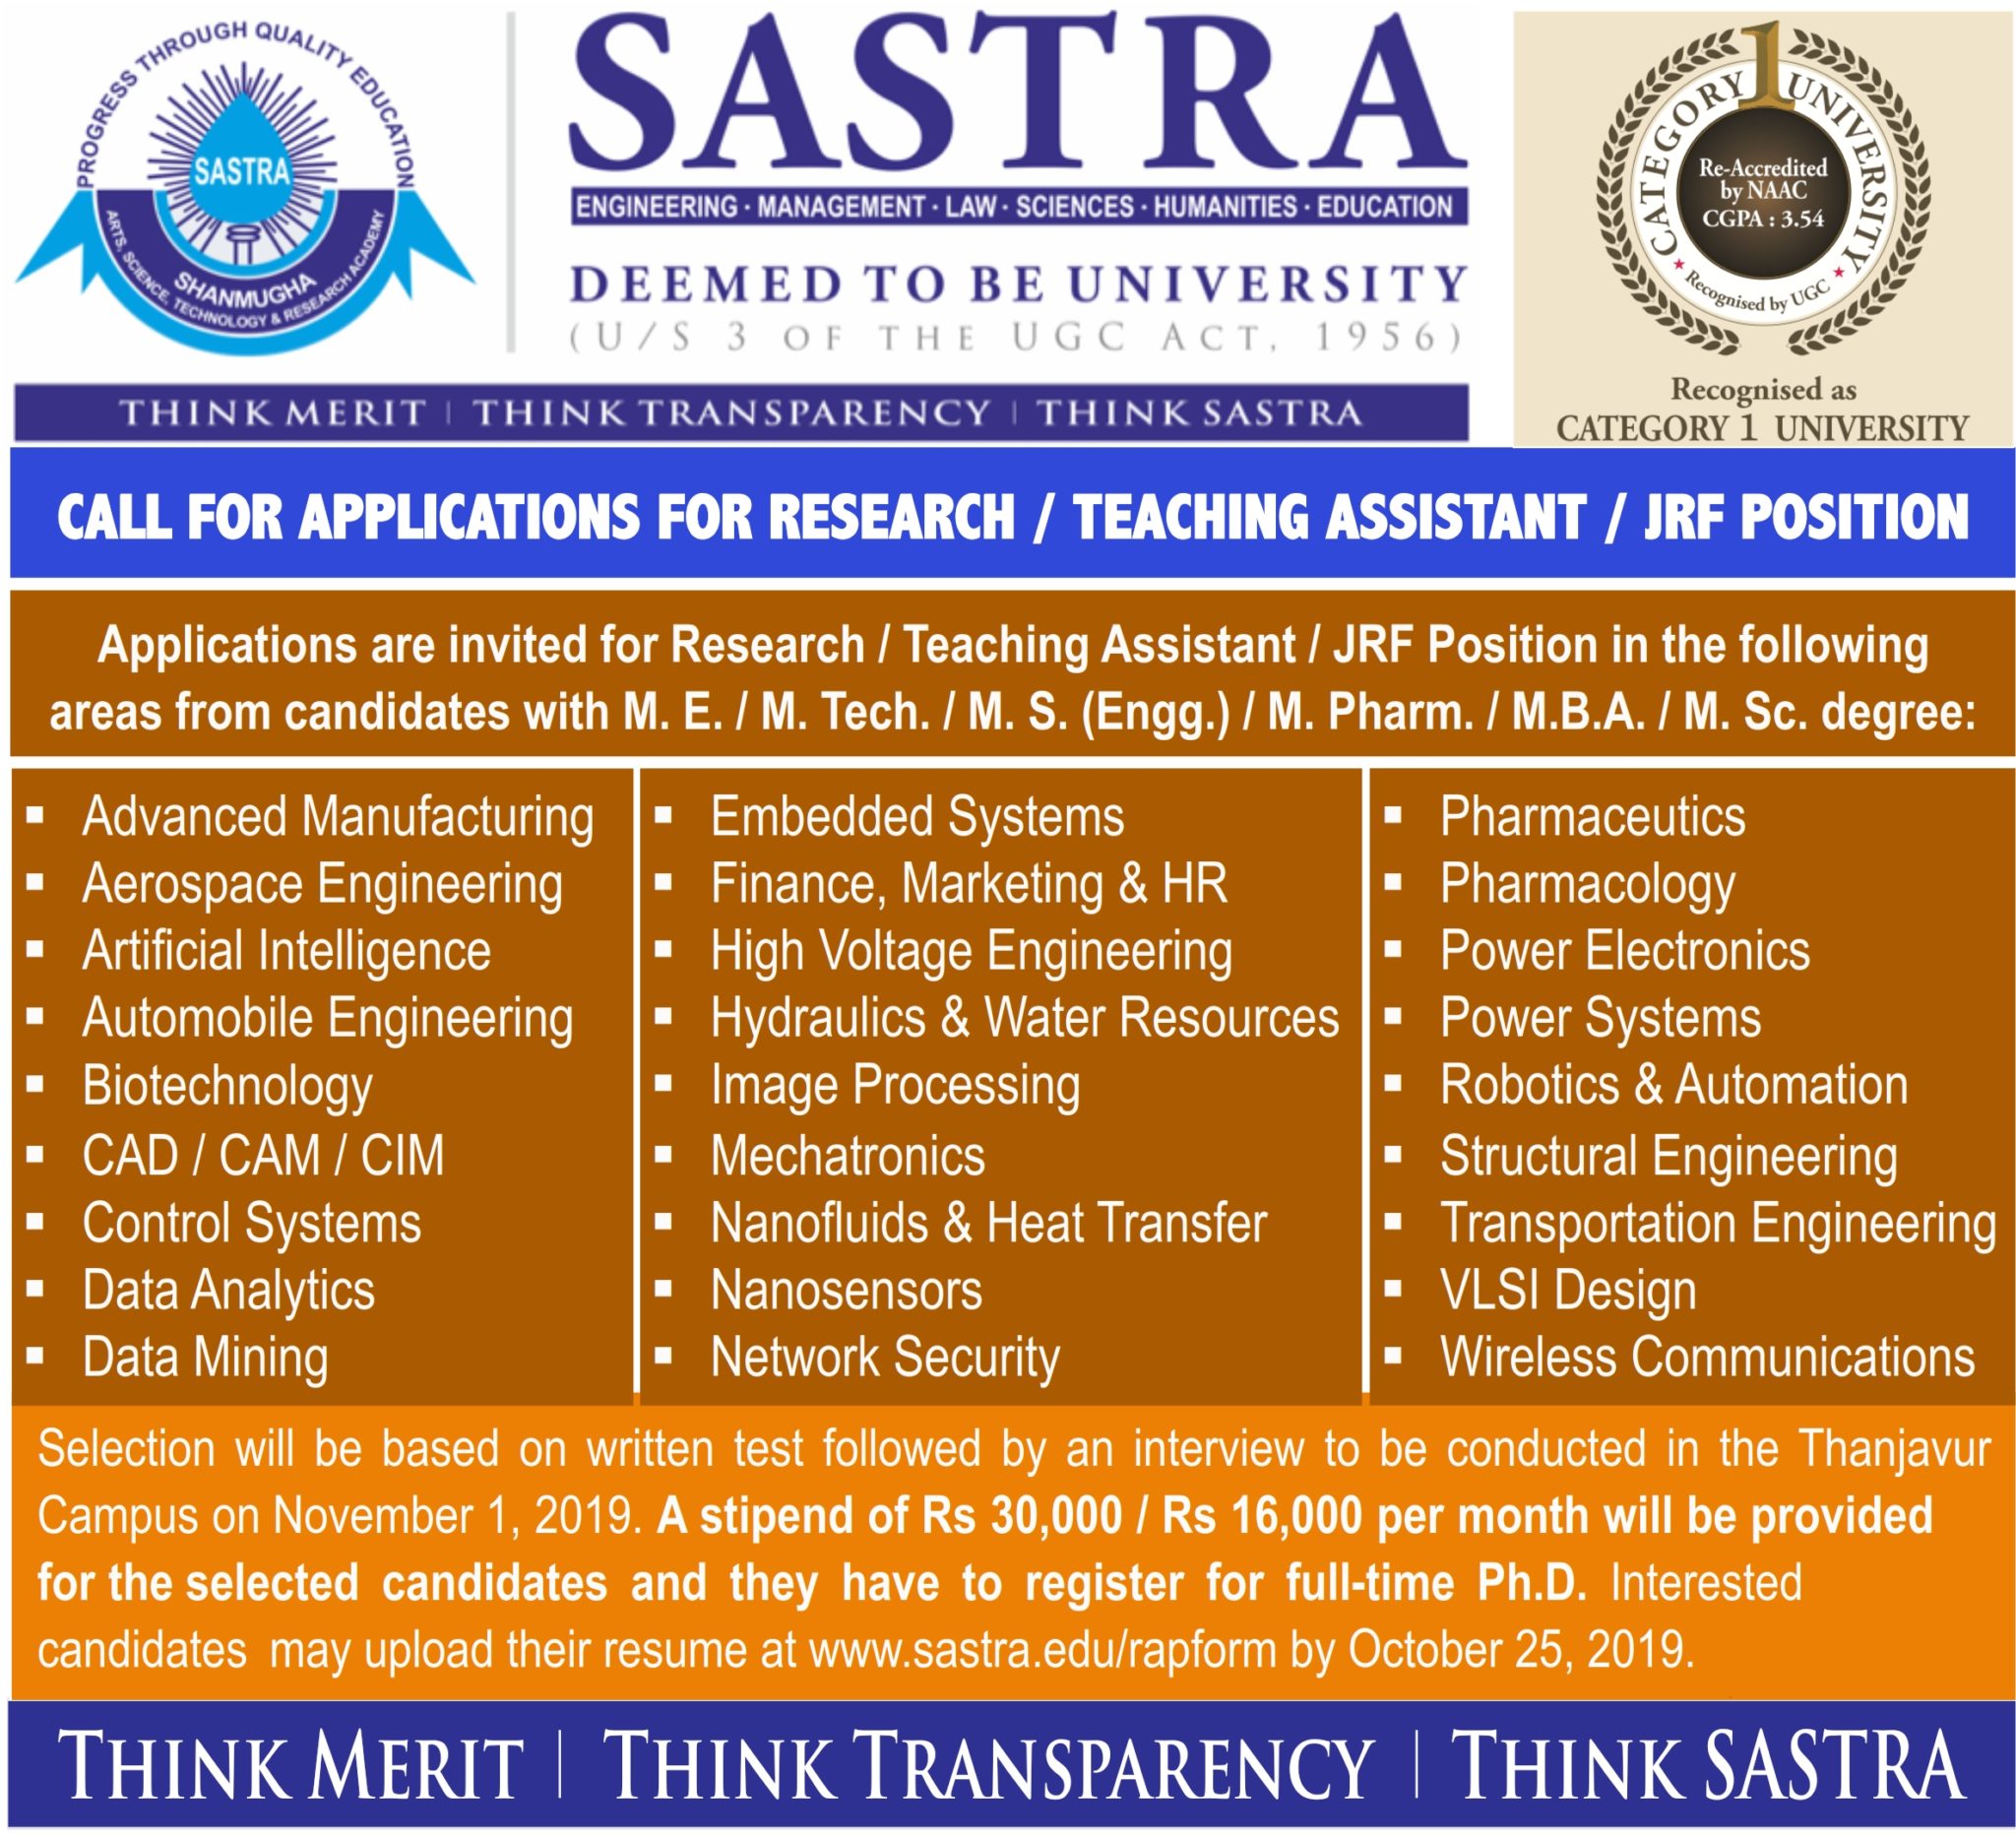 Opportunities for Master Degree Holders: SASTRA Deemed University hiring Research, Teaching Assistant & JRF Positions via PhD program